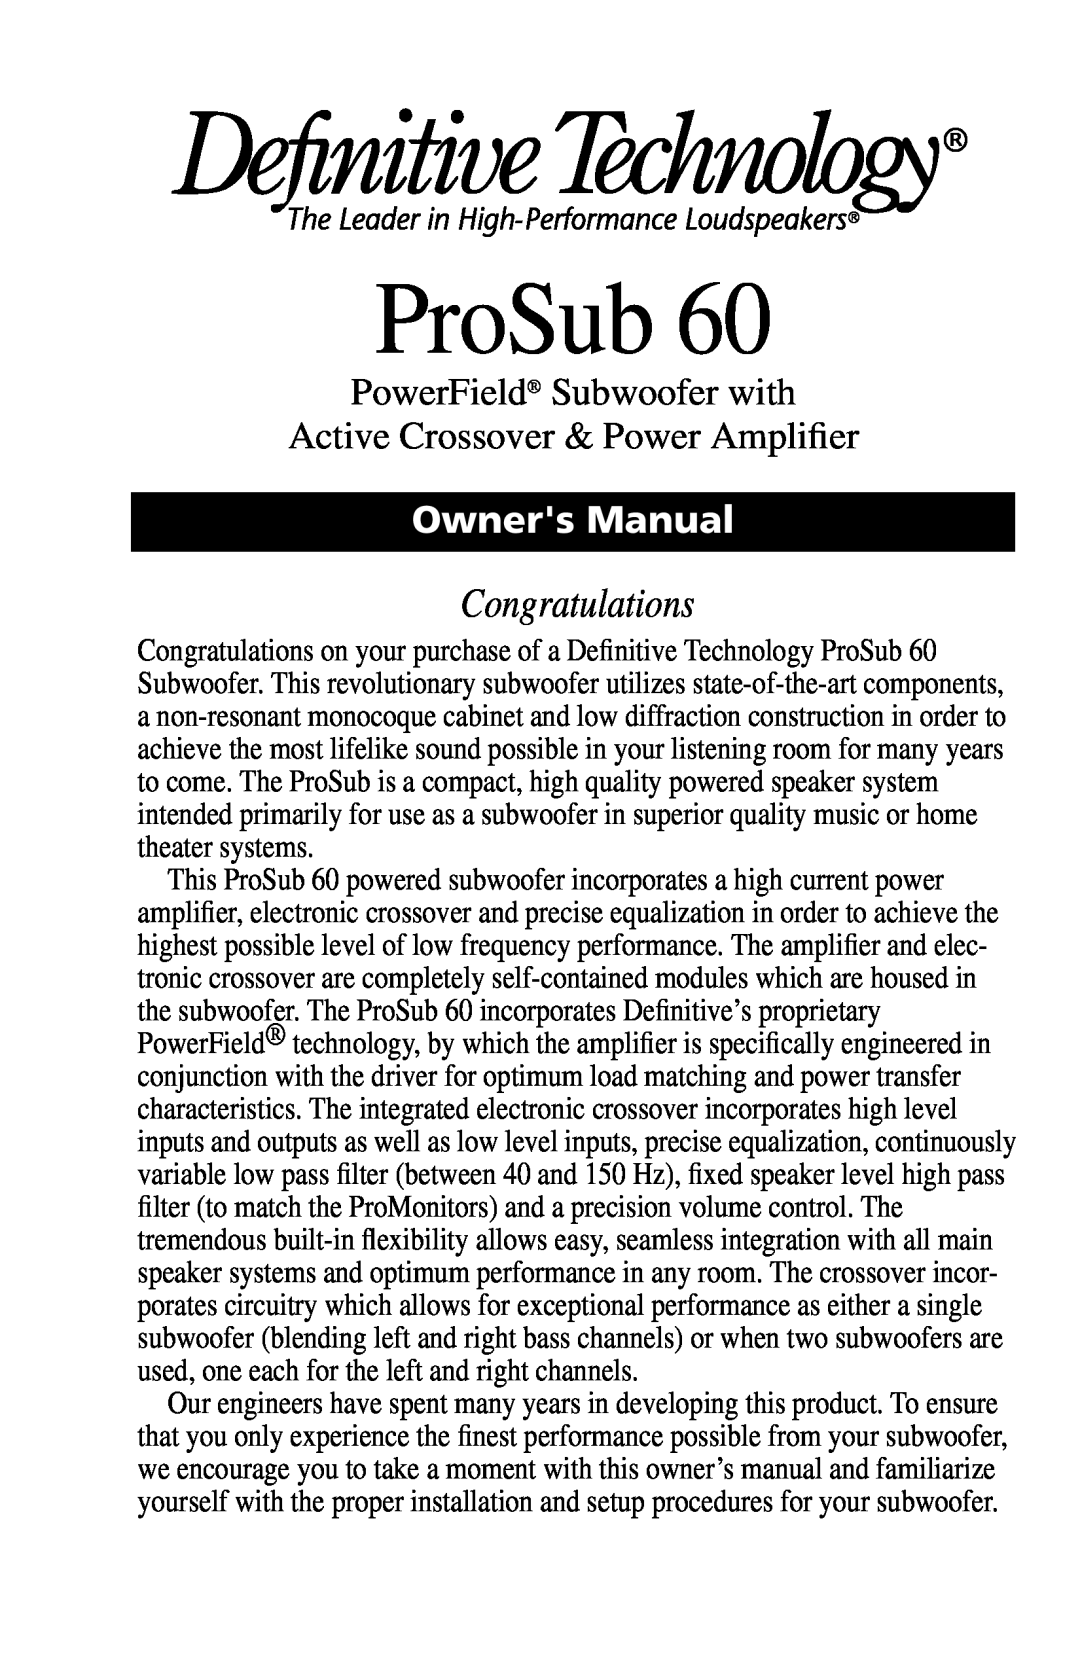 Definitive Technology 60 owner manual ProSub, Congratulations, PowerField Subwoofer with 